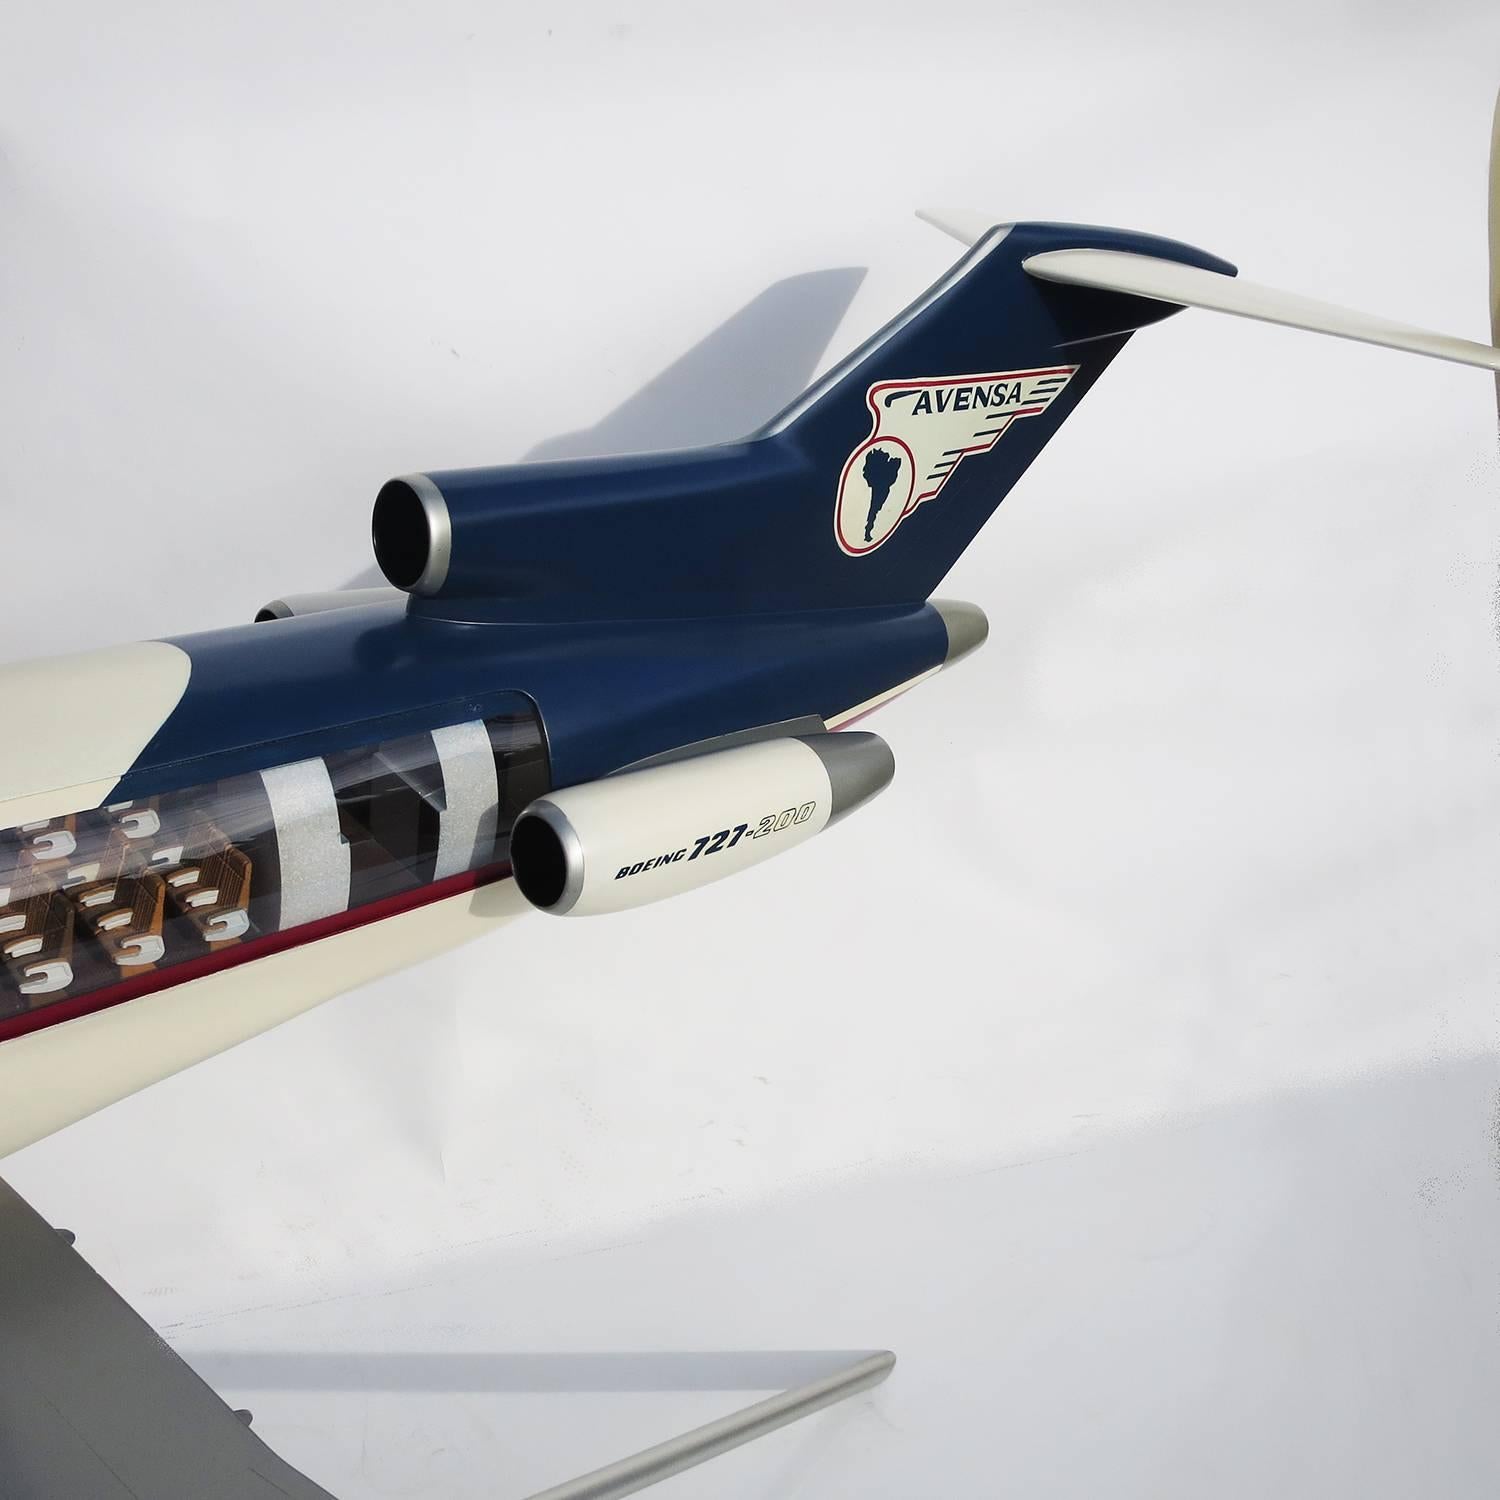 Painted Massive Boeing 727 Cutaway Jet Model for Avensa Airlines